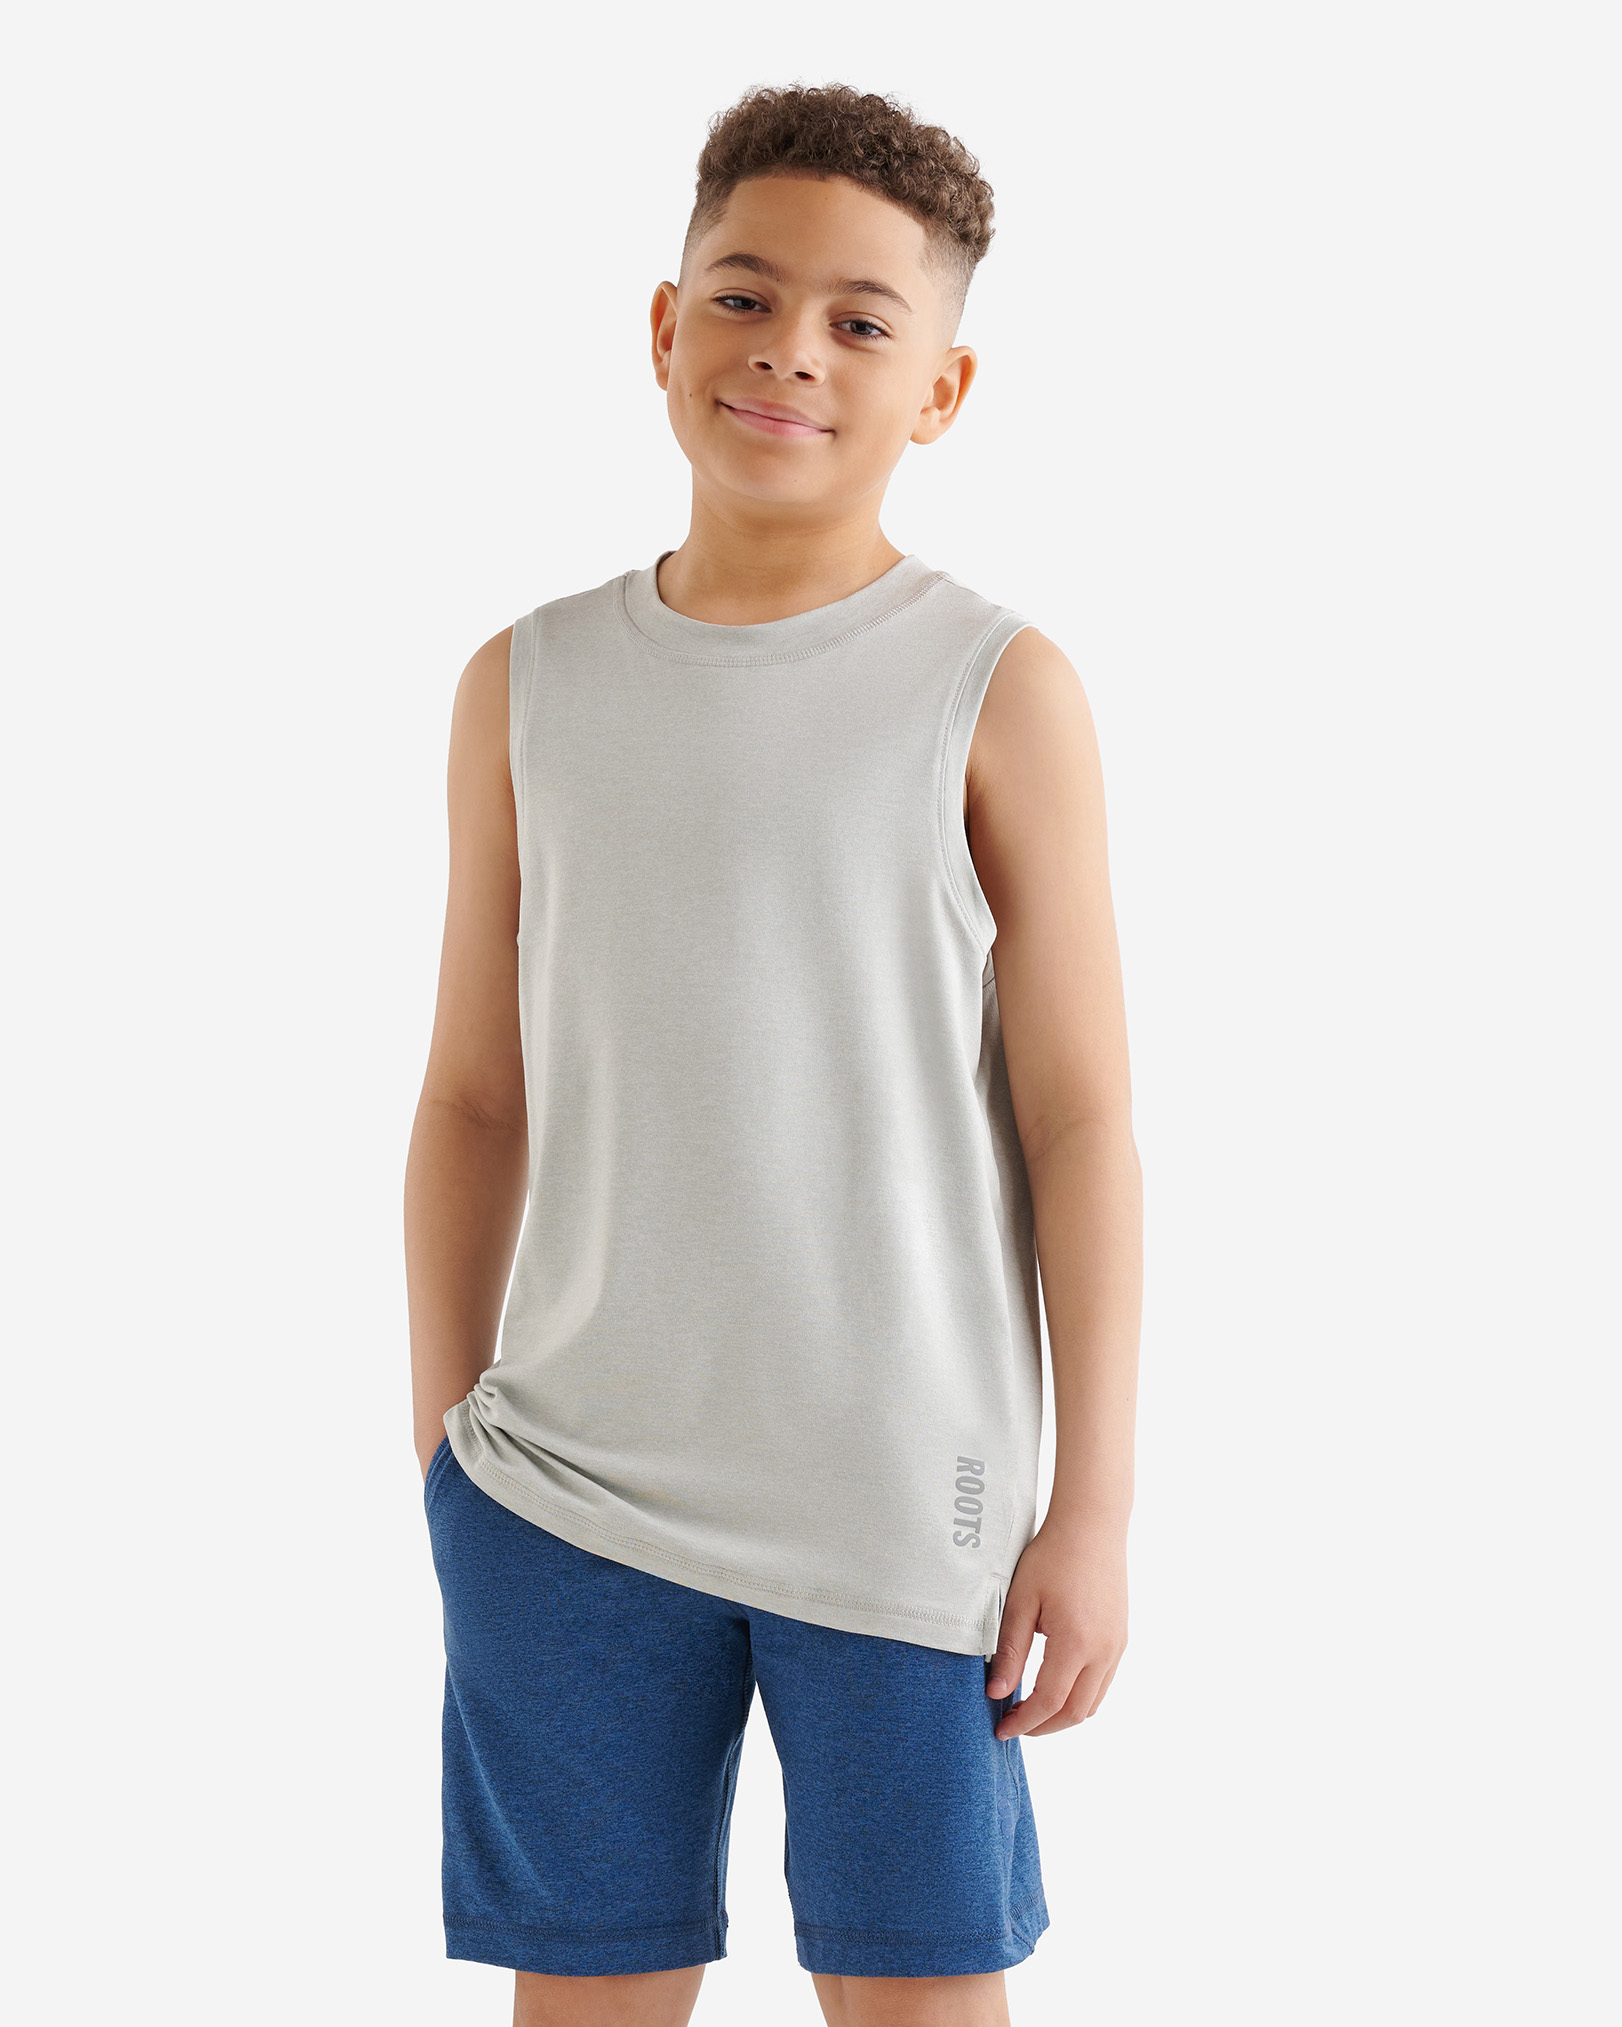 Roots Boy's Active Tank Top in Grey Mix